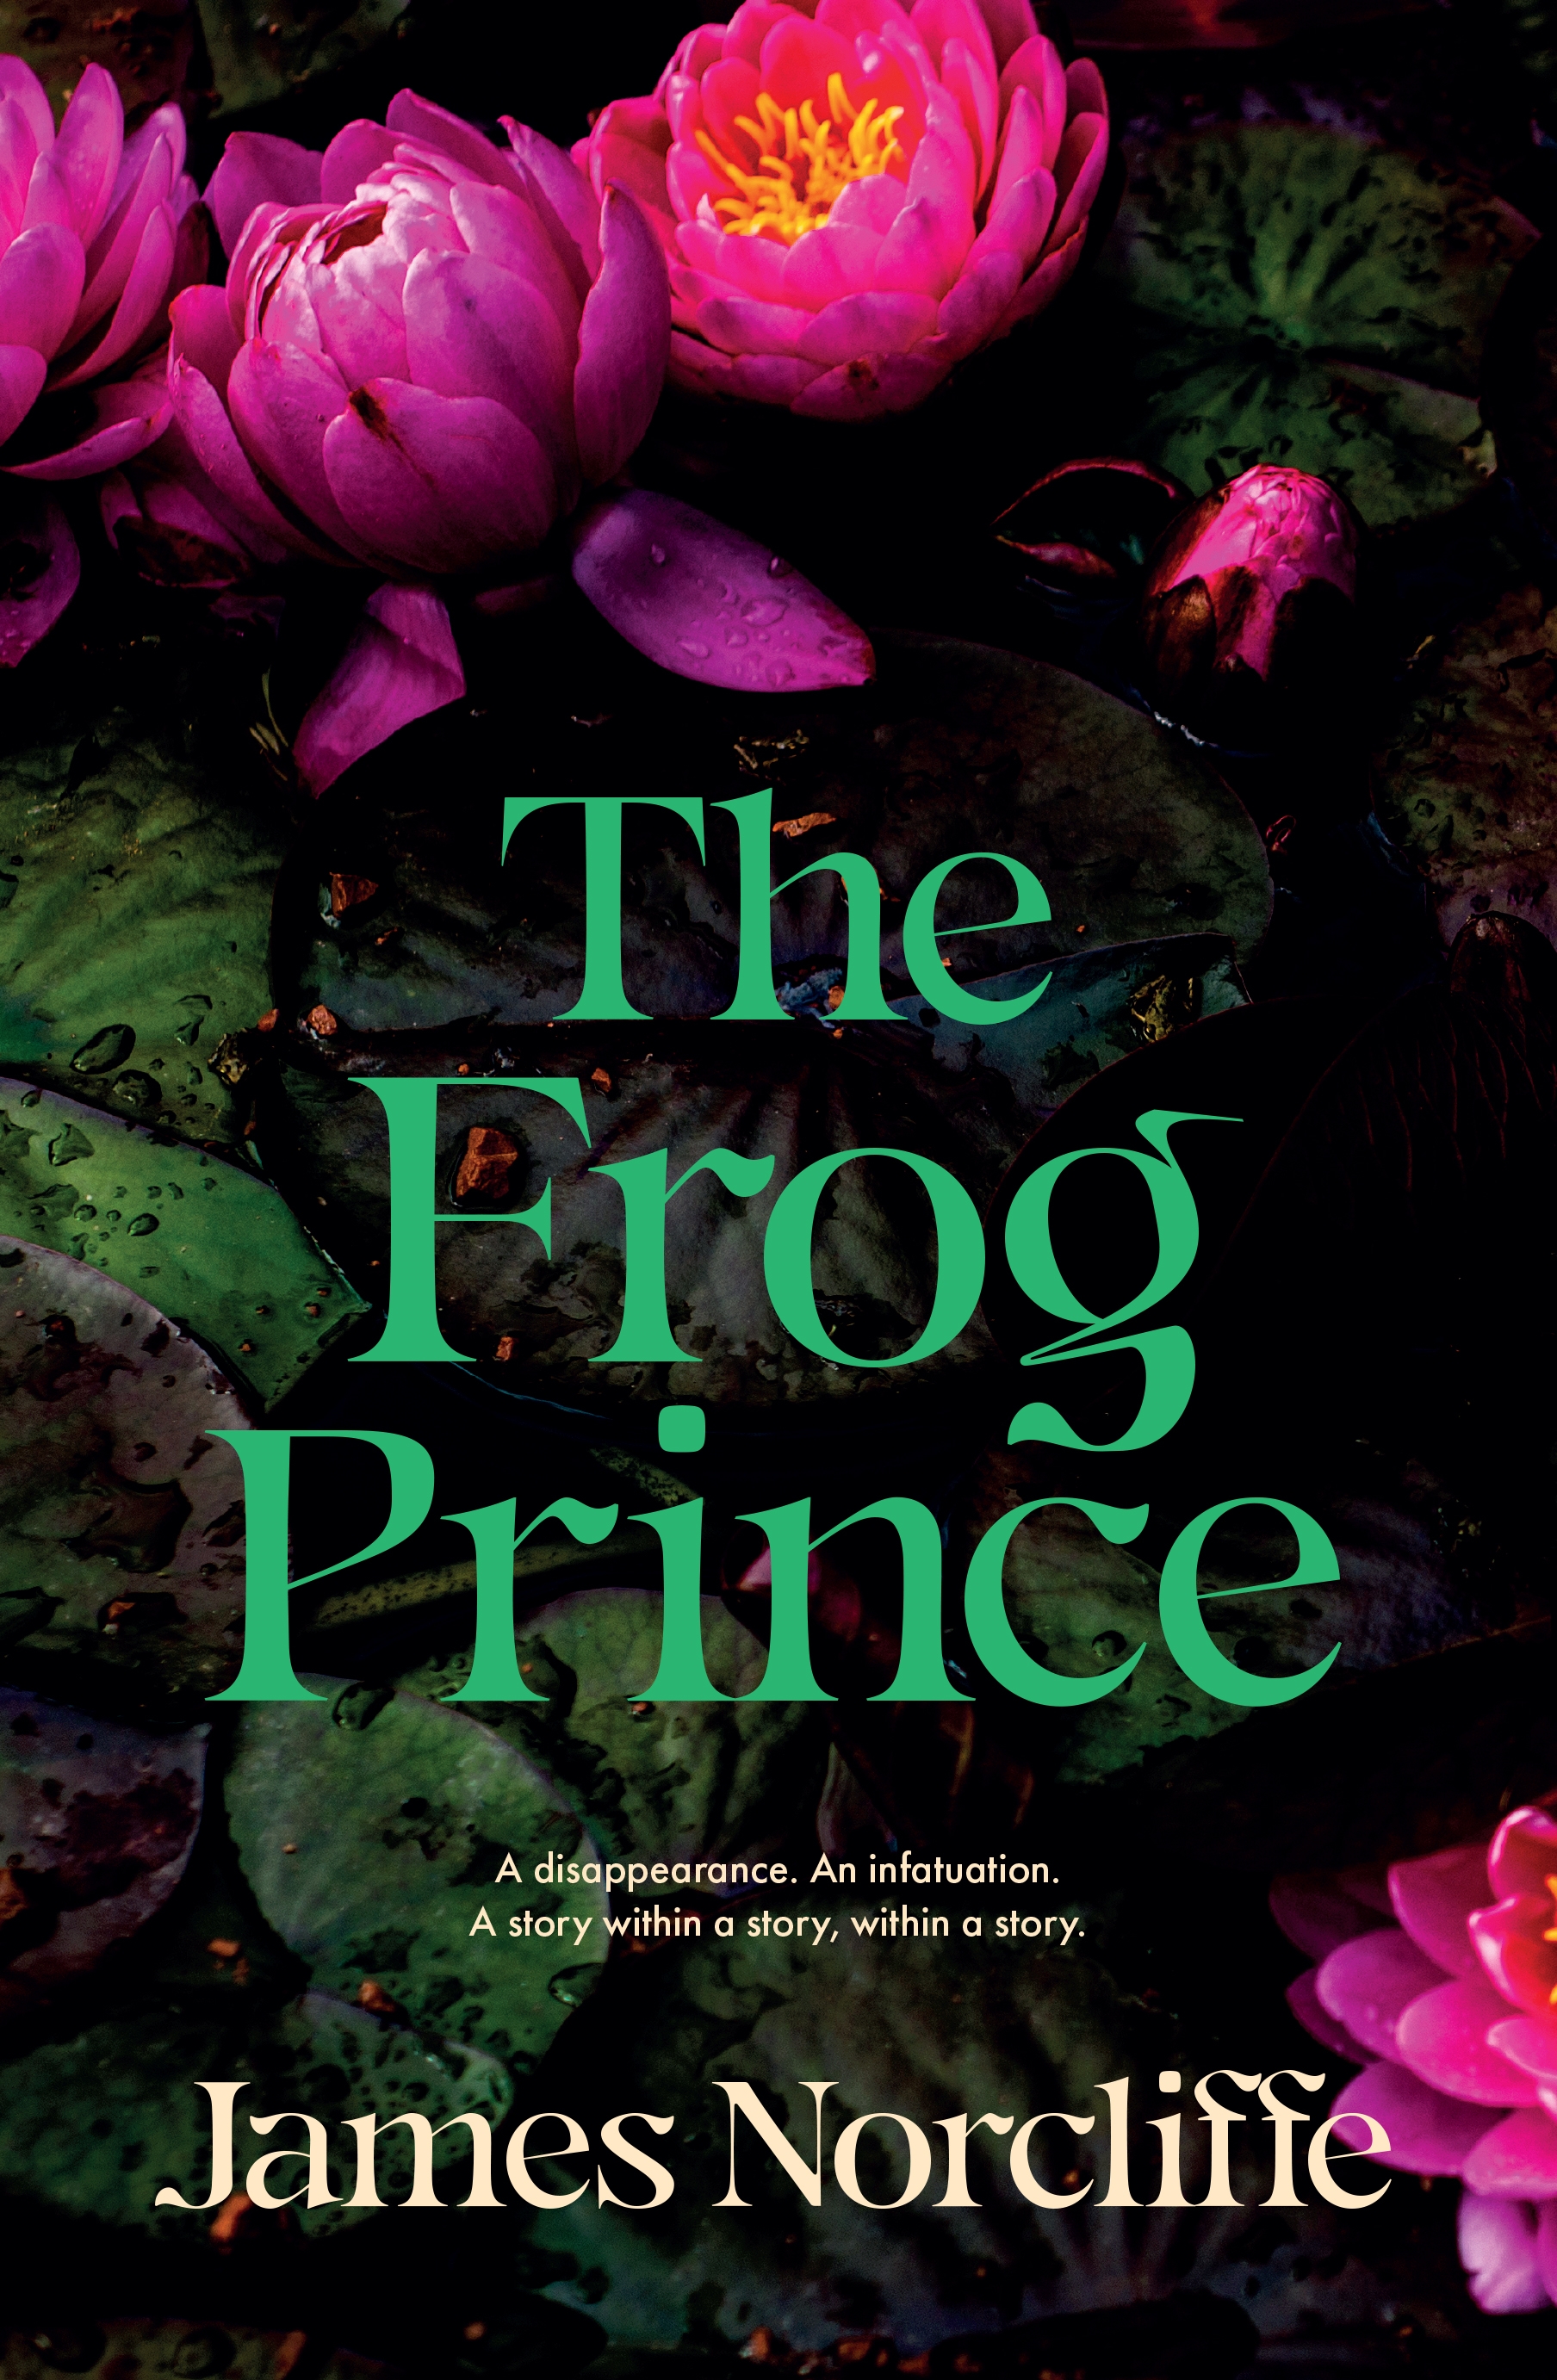 The Frog Prince by James Norcliffe - Penguin Books New Zealand